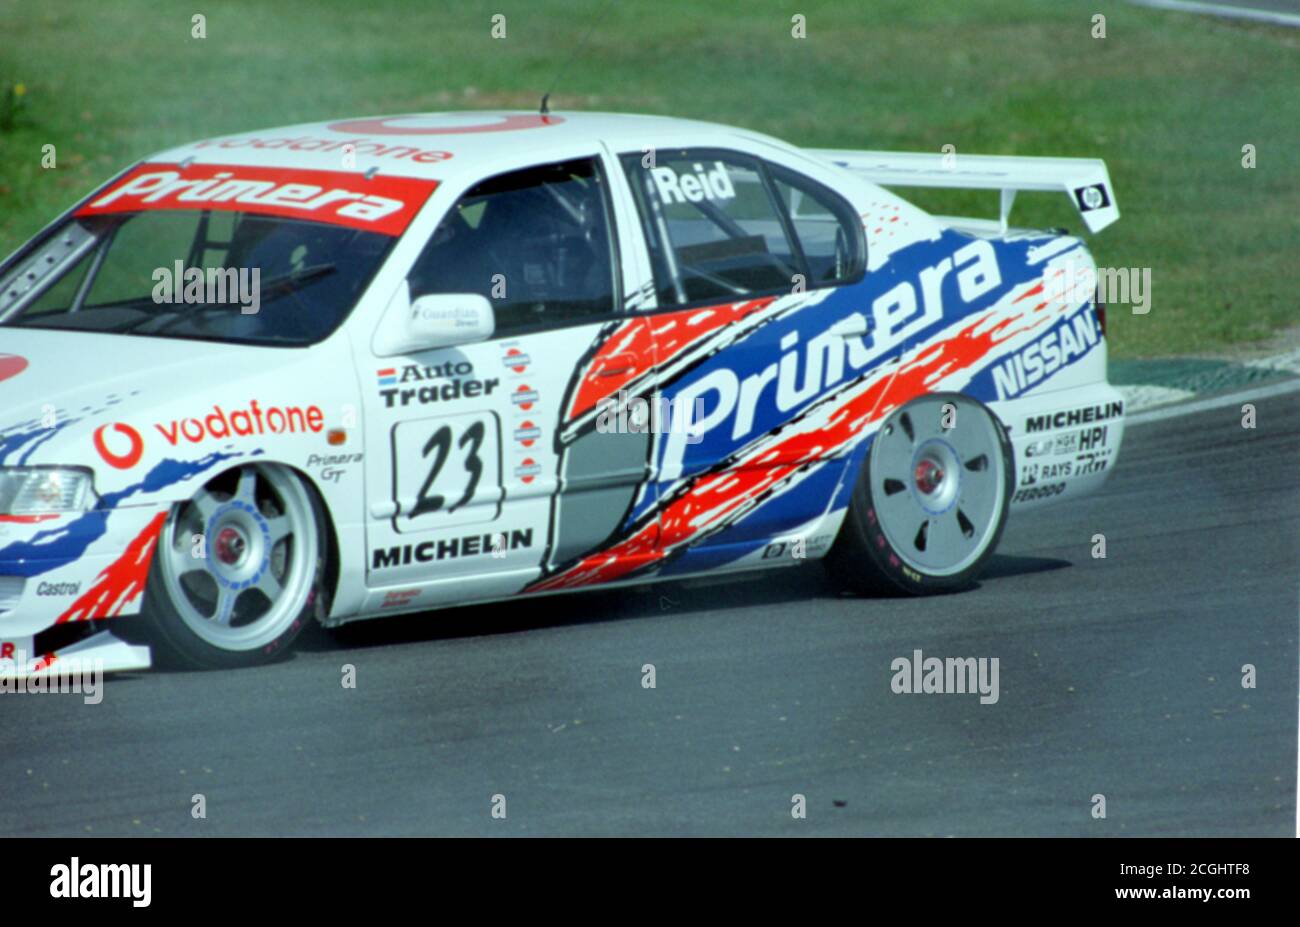 Archive image: British Touring Car Championships at Brands Hatch on 31st August 1998, image scanned from colour negative. Anthony Reid in the Nissan Primera GT of Vodafone Nissan Racing team. Stock Photo